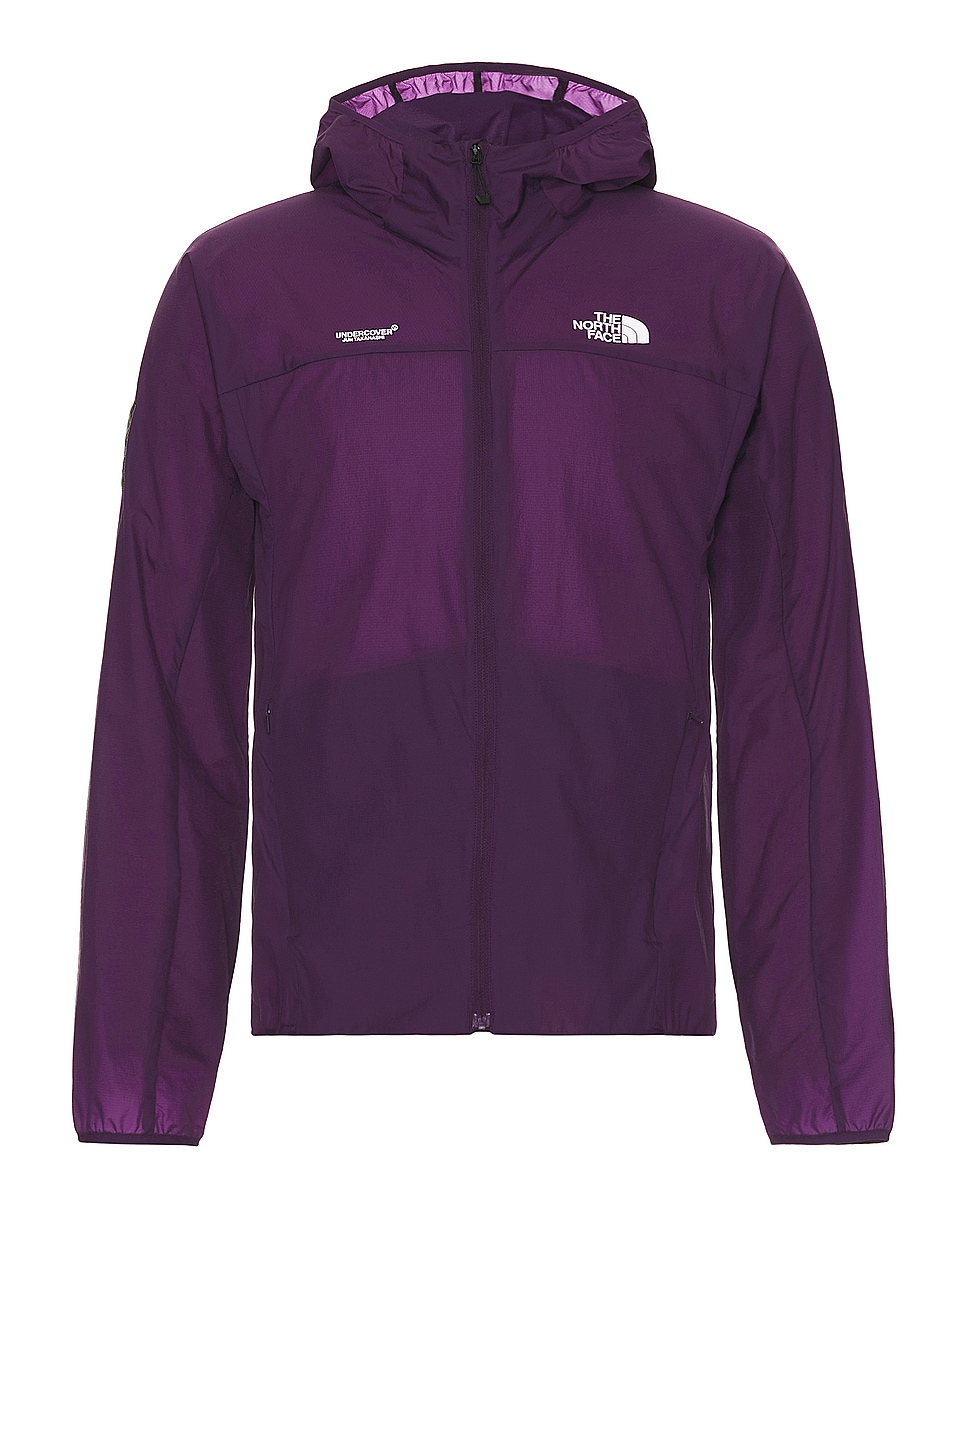 Image 1 of The North Face Soukuu Trail Run Packable Wind Jacket in Purple Pennat